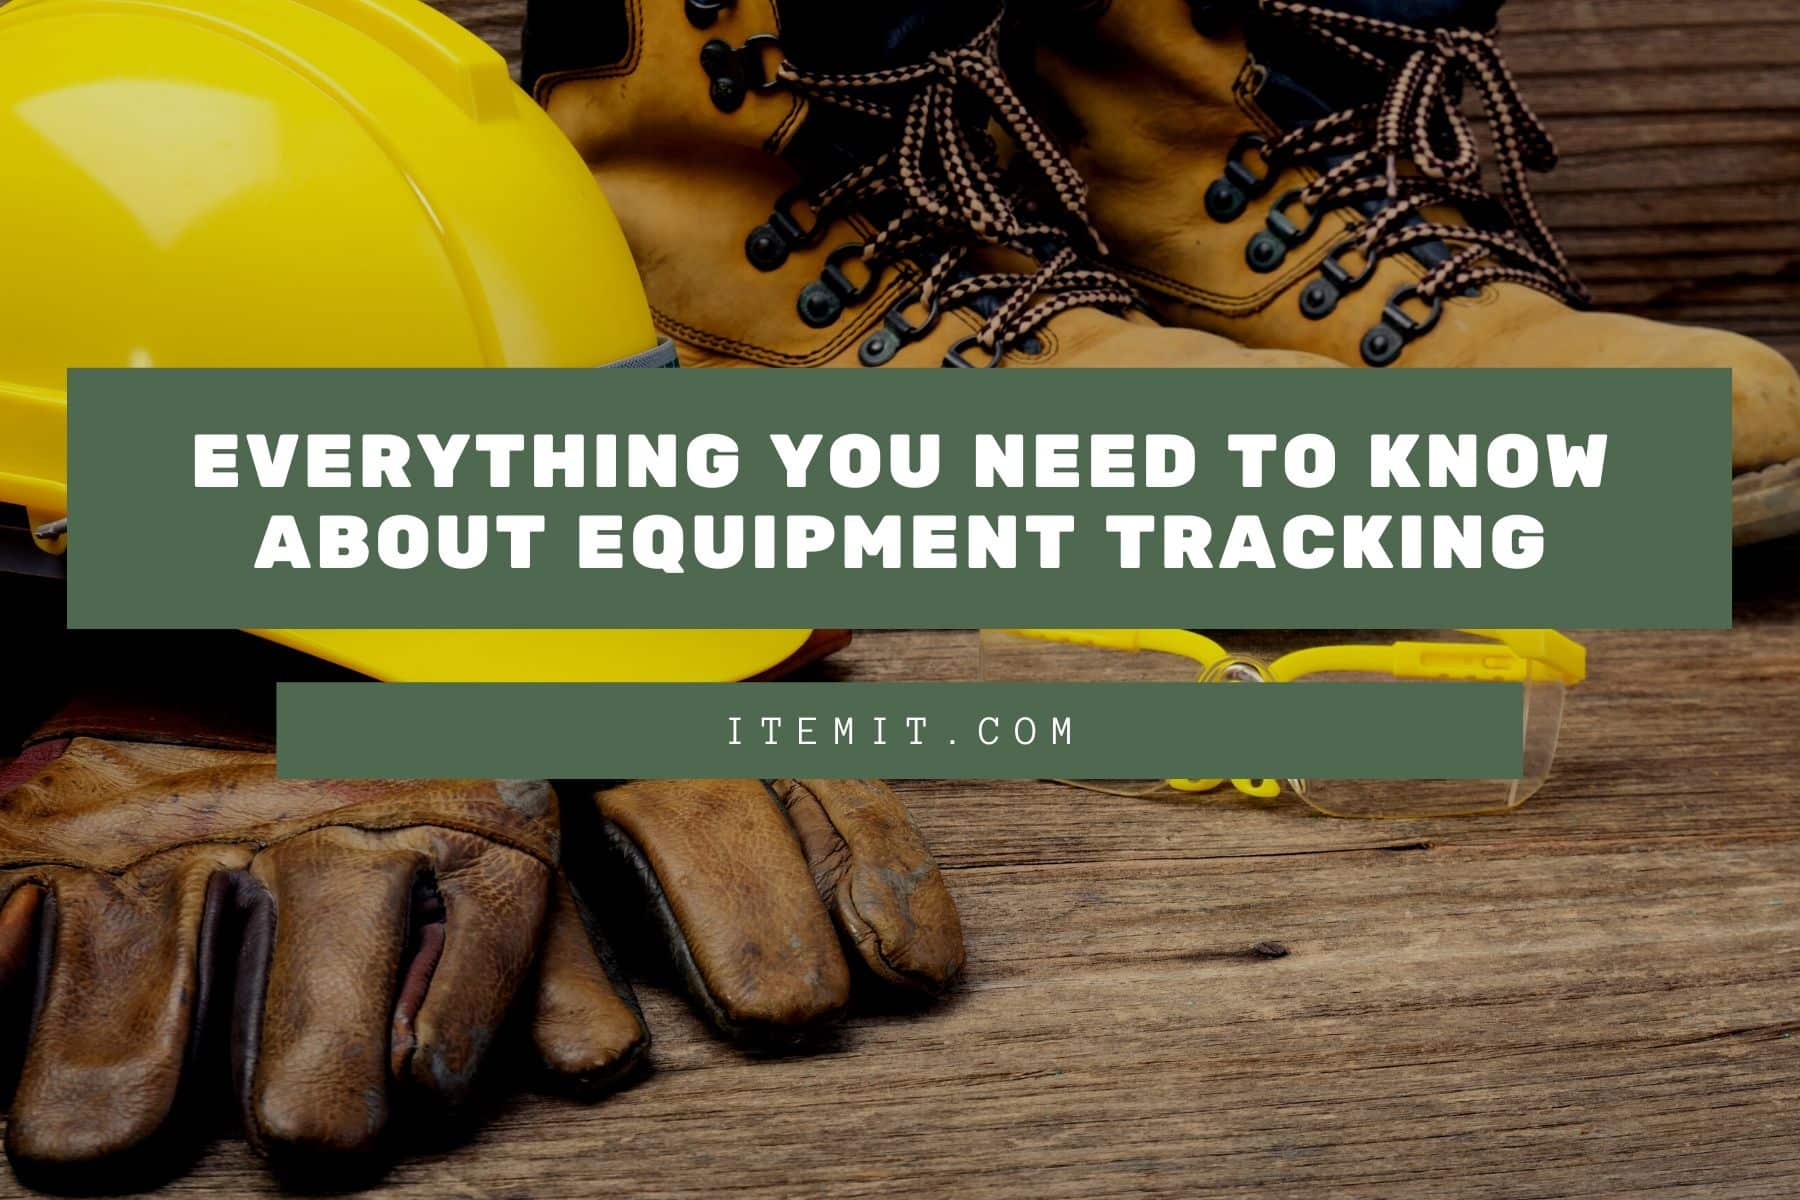 Equipment tracking everything you need to know